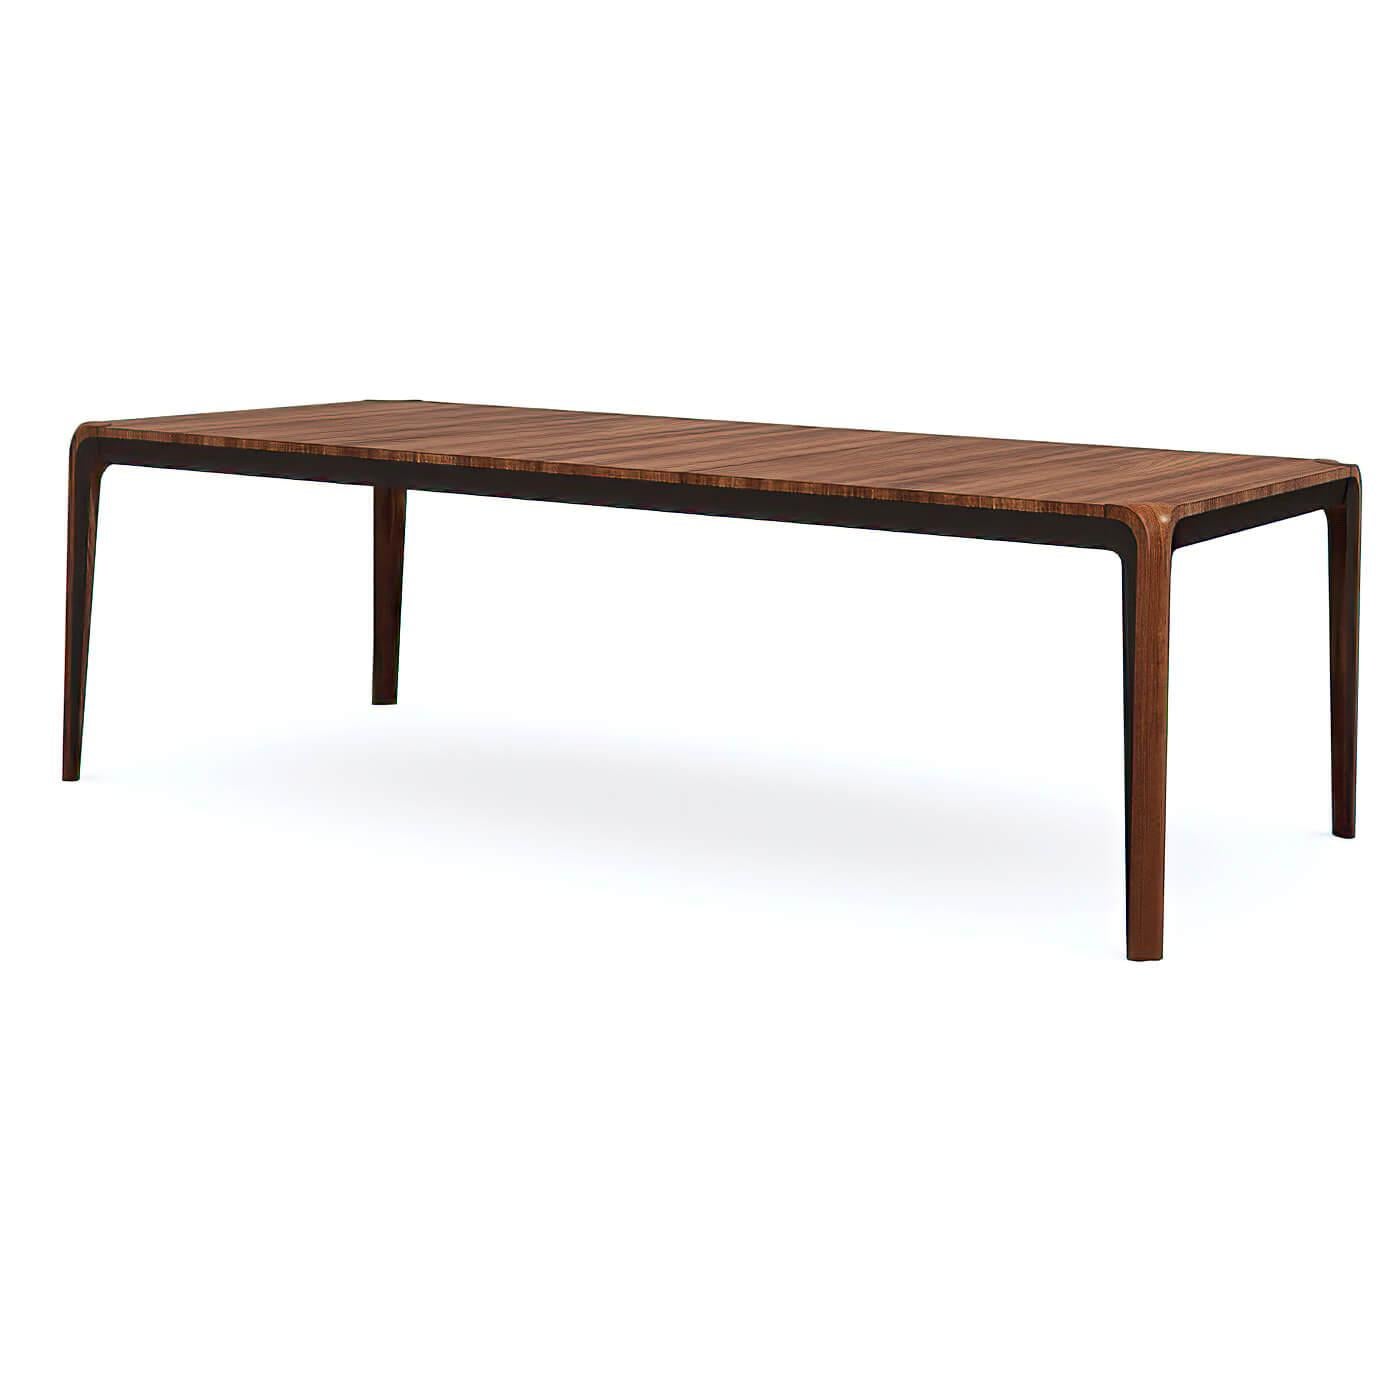 A Mid Century Modern-style walnut extending dining table with tapered legs. The tabletop is finished in rich walnut with mitered edges in Dark Chocolate. It features self-storing leaves and a foldable center support leg that tucks away neatly when